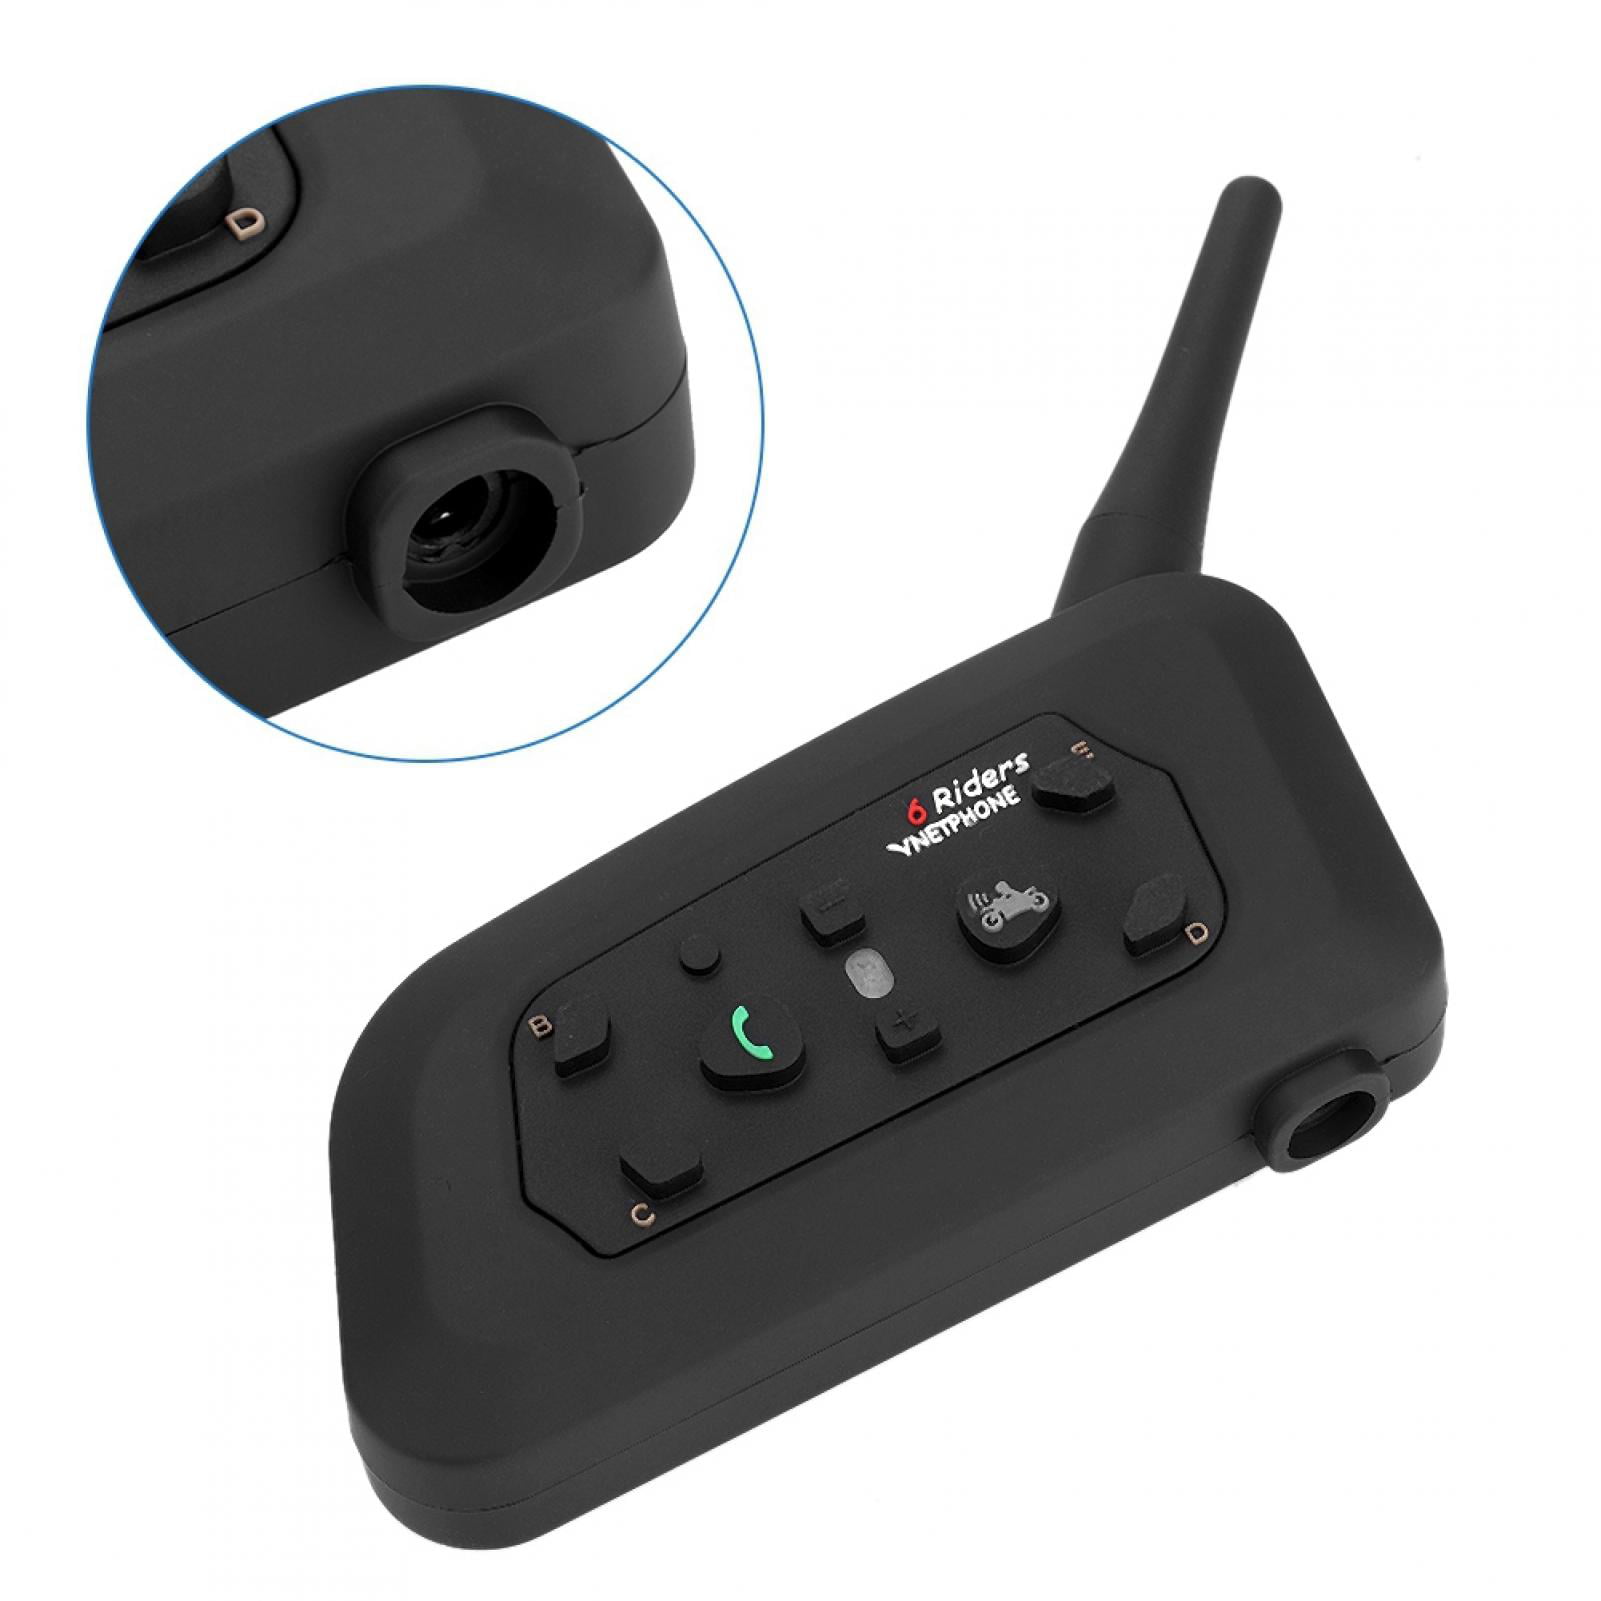 Brrnoo V6-1200 Motorcycle Wireless Hands Free Headphone 6 Users Full Duplex Referee For Referee Aerial Photography Concert Skiing - Walmart.com